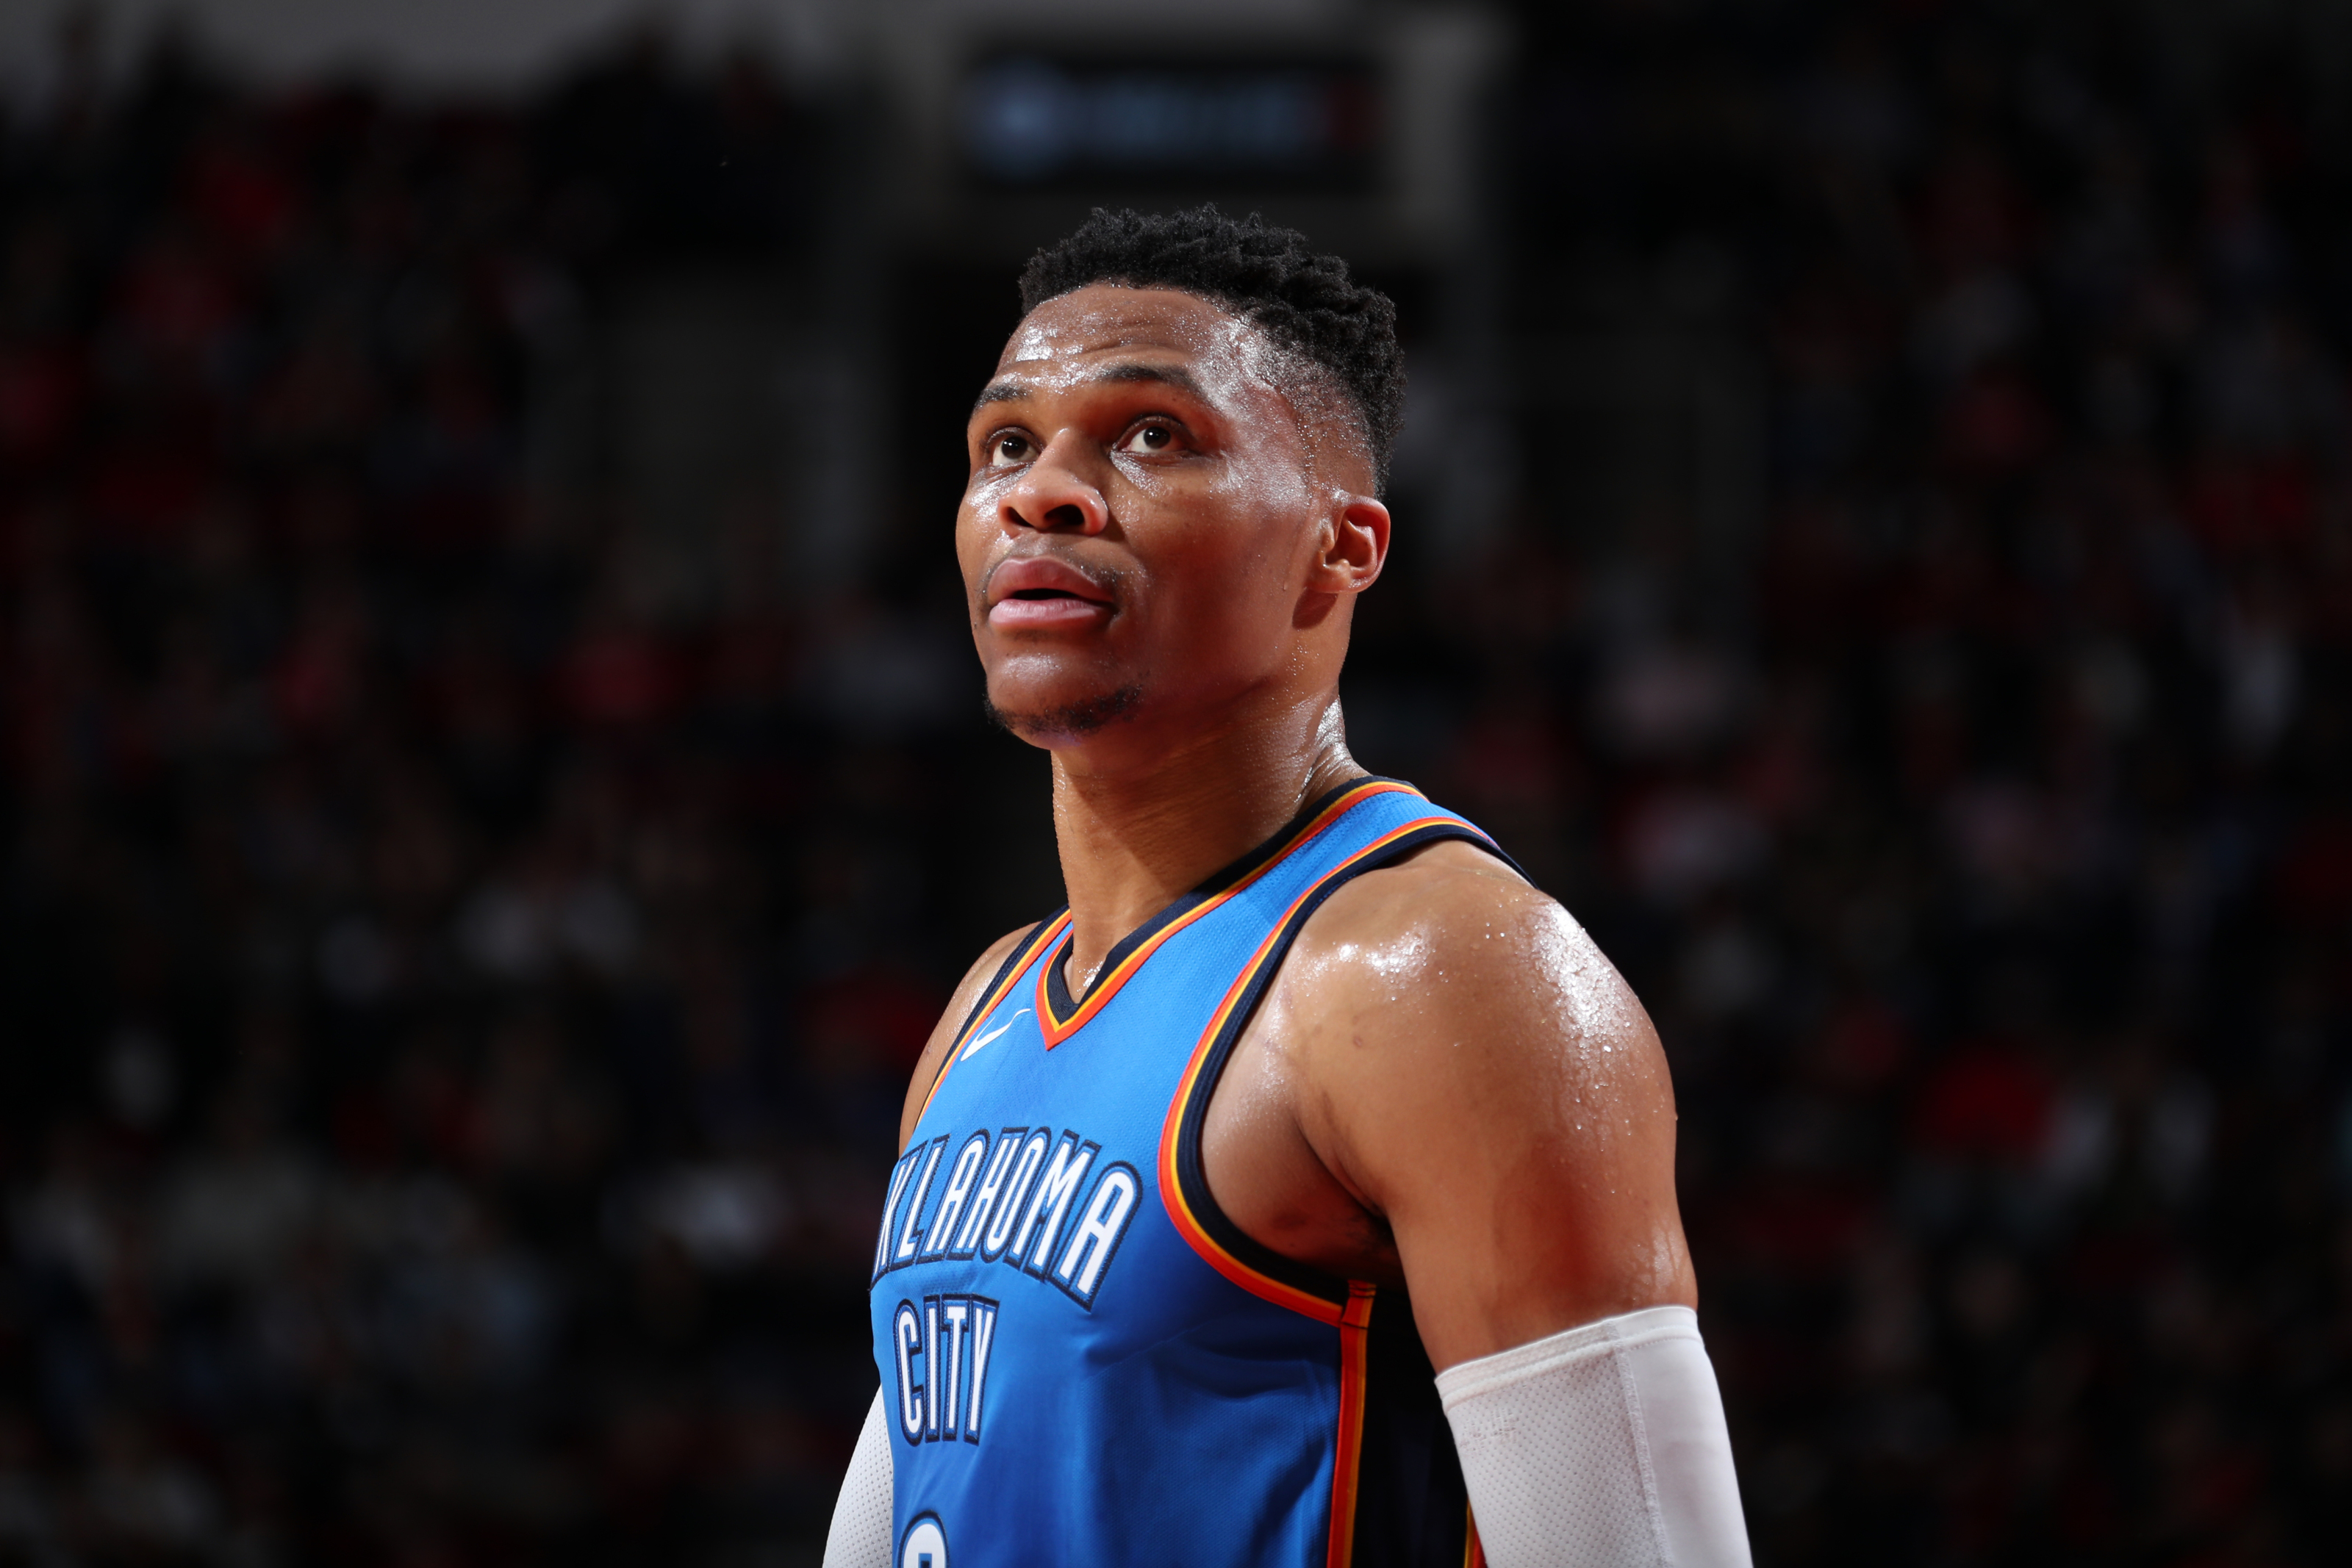 Russell Westbrook shows he still has an elite gear to his game for